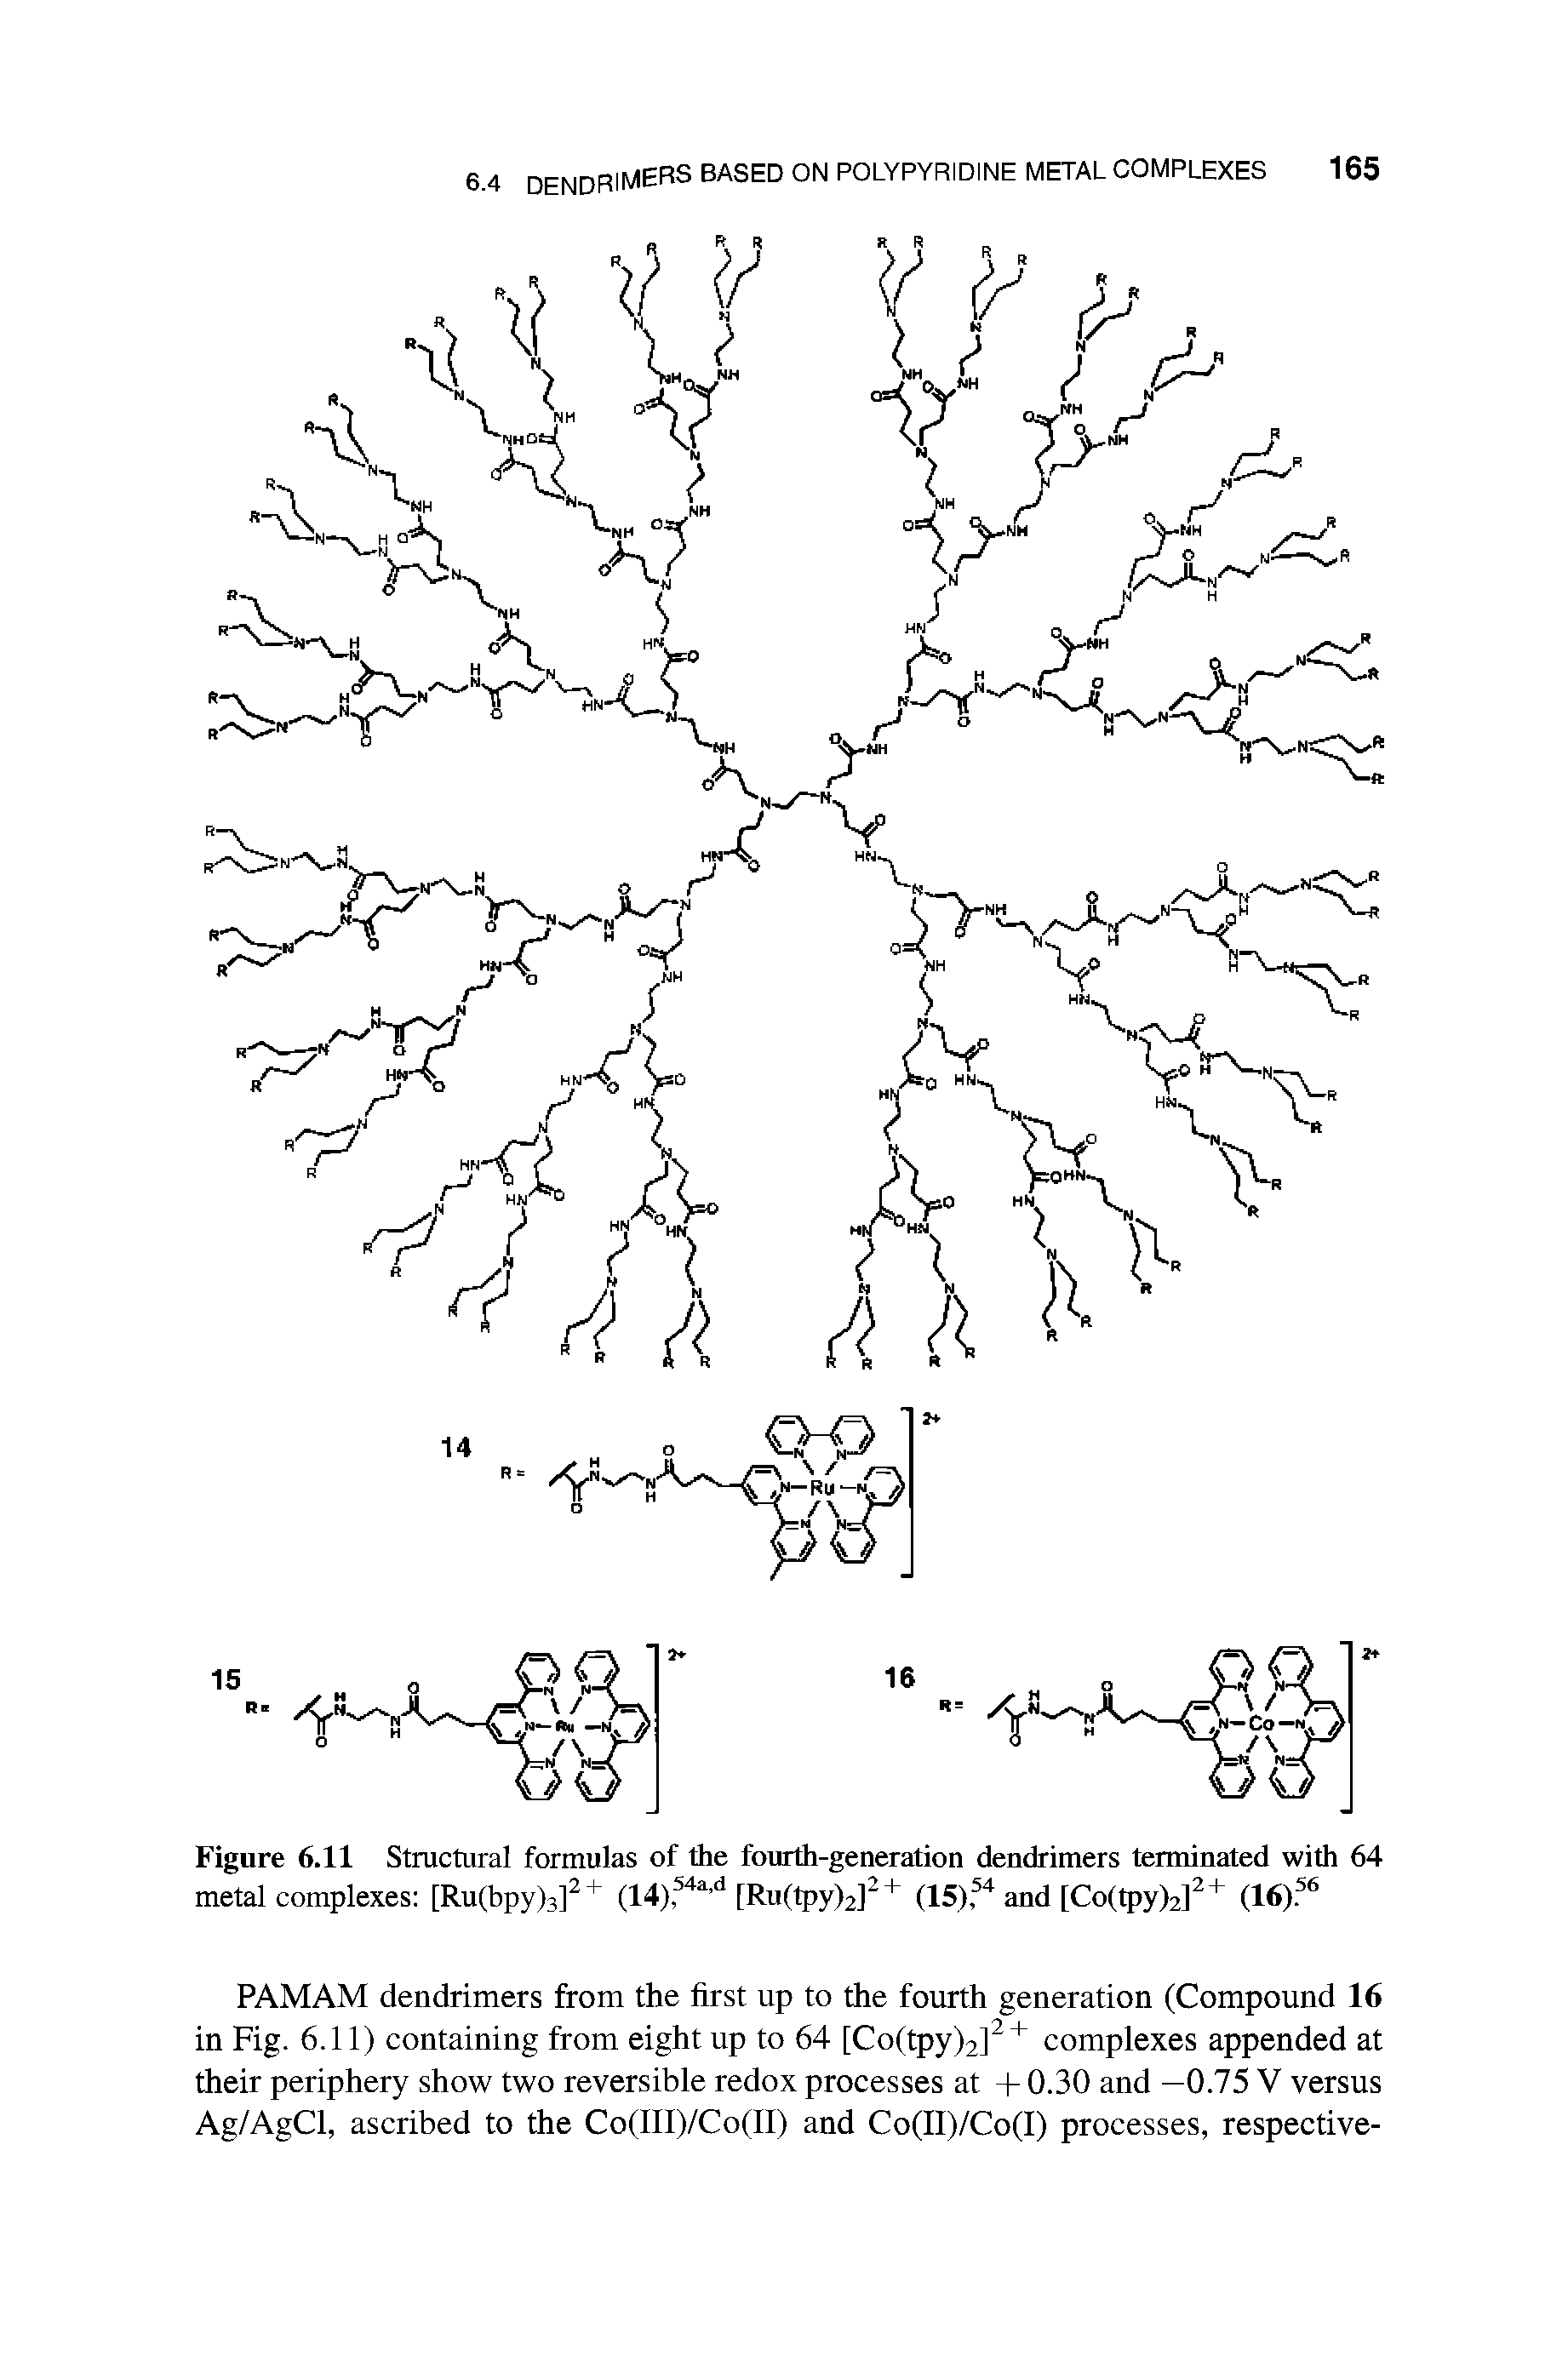 Figure 6.11 Structural formulas of the fourth-generation dendrimers terminated with 64 metal complexes [Ru(bpy)3]2+ (14),54a,d [Ru(tpy)2]2+ (15),54 and [Co(tpy)212 1 (16).56...